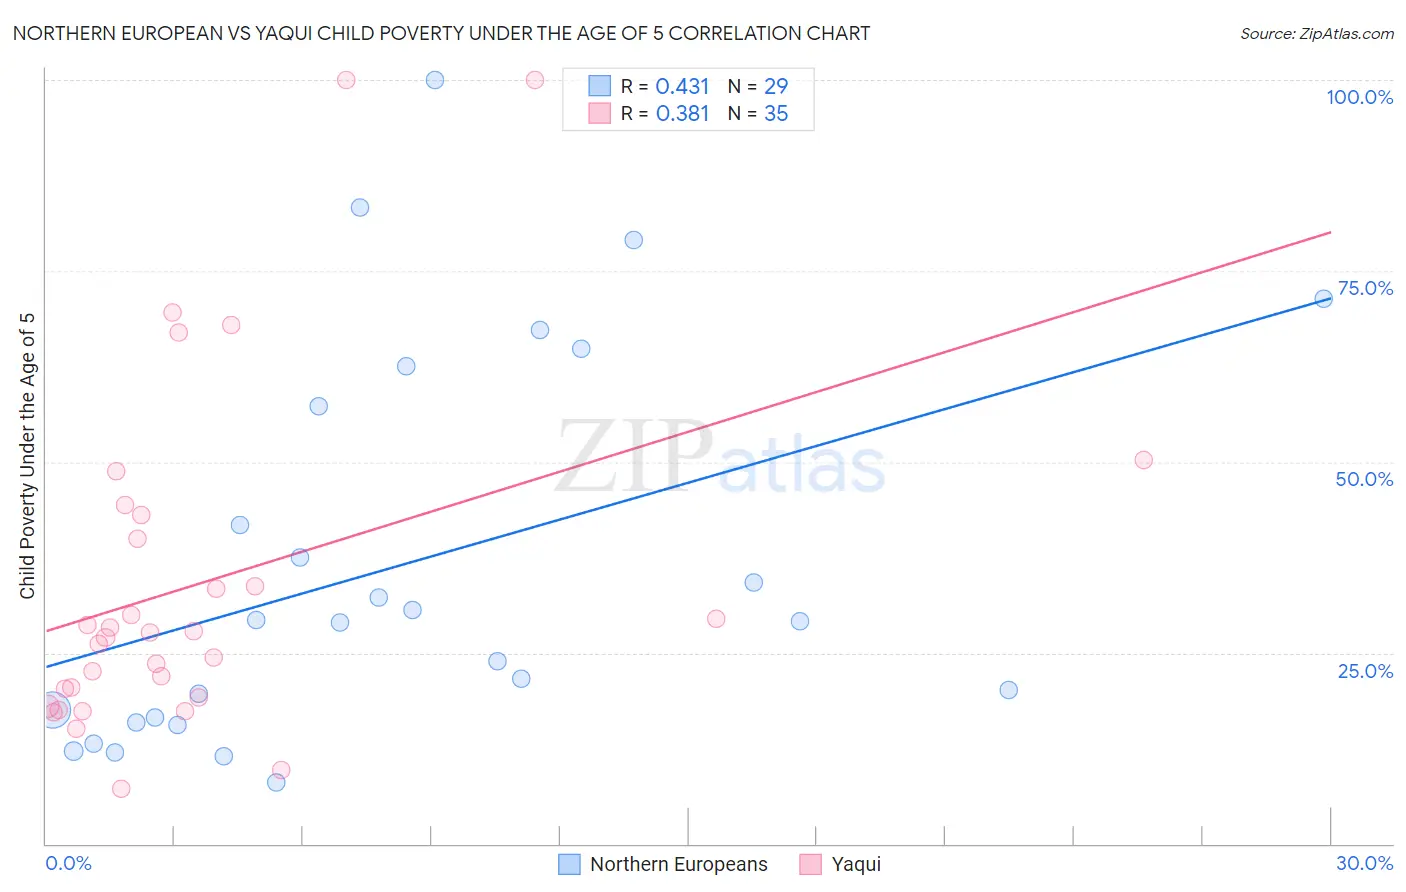 Northern European vs Yaqui Child Poverty Under the Age of 5